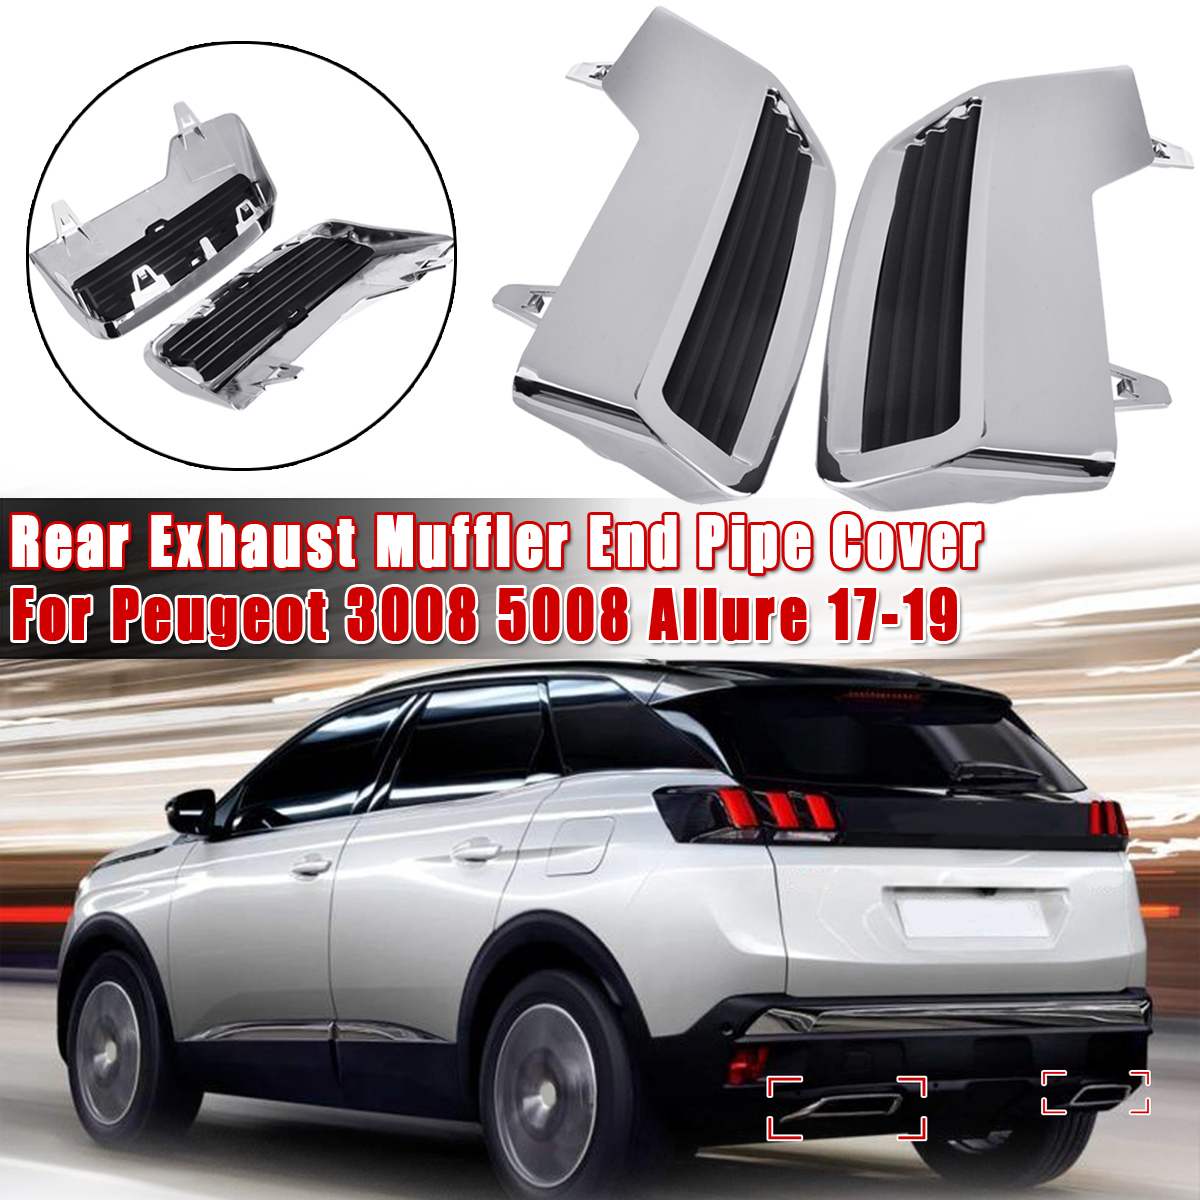 Chrome Rear Exhaust for Peugeot 3008 5008 Muffler Tail End Pipe Cover Accessories for 2017 -2022 Car Styling 2PCS ABS - Price history & Review | AliExpress Seller - Alidubuy Trading Ltd. | Alitools.io